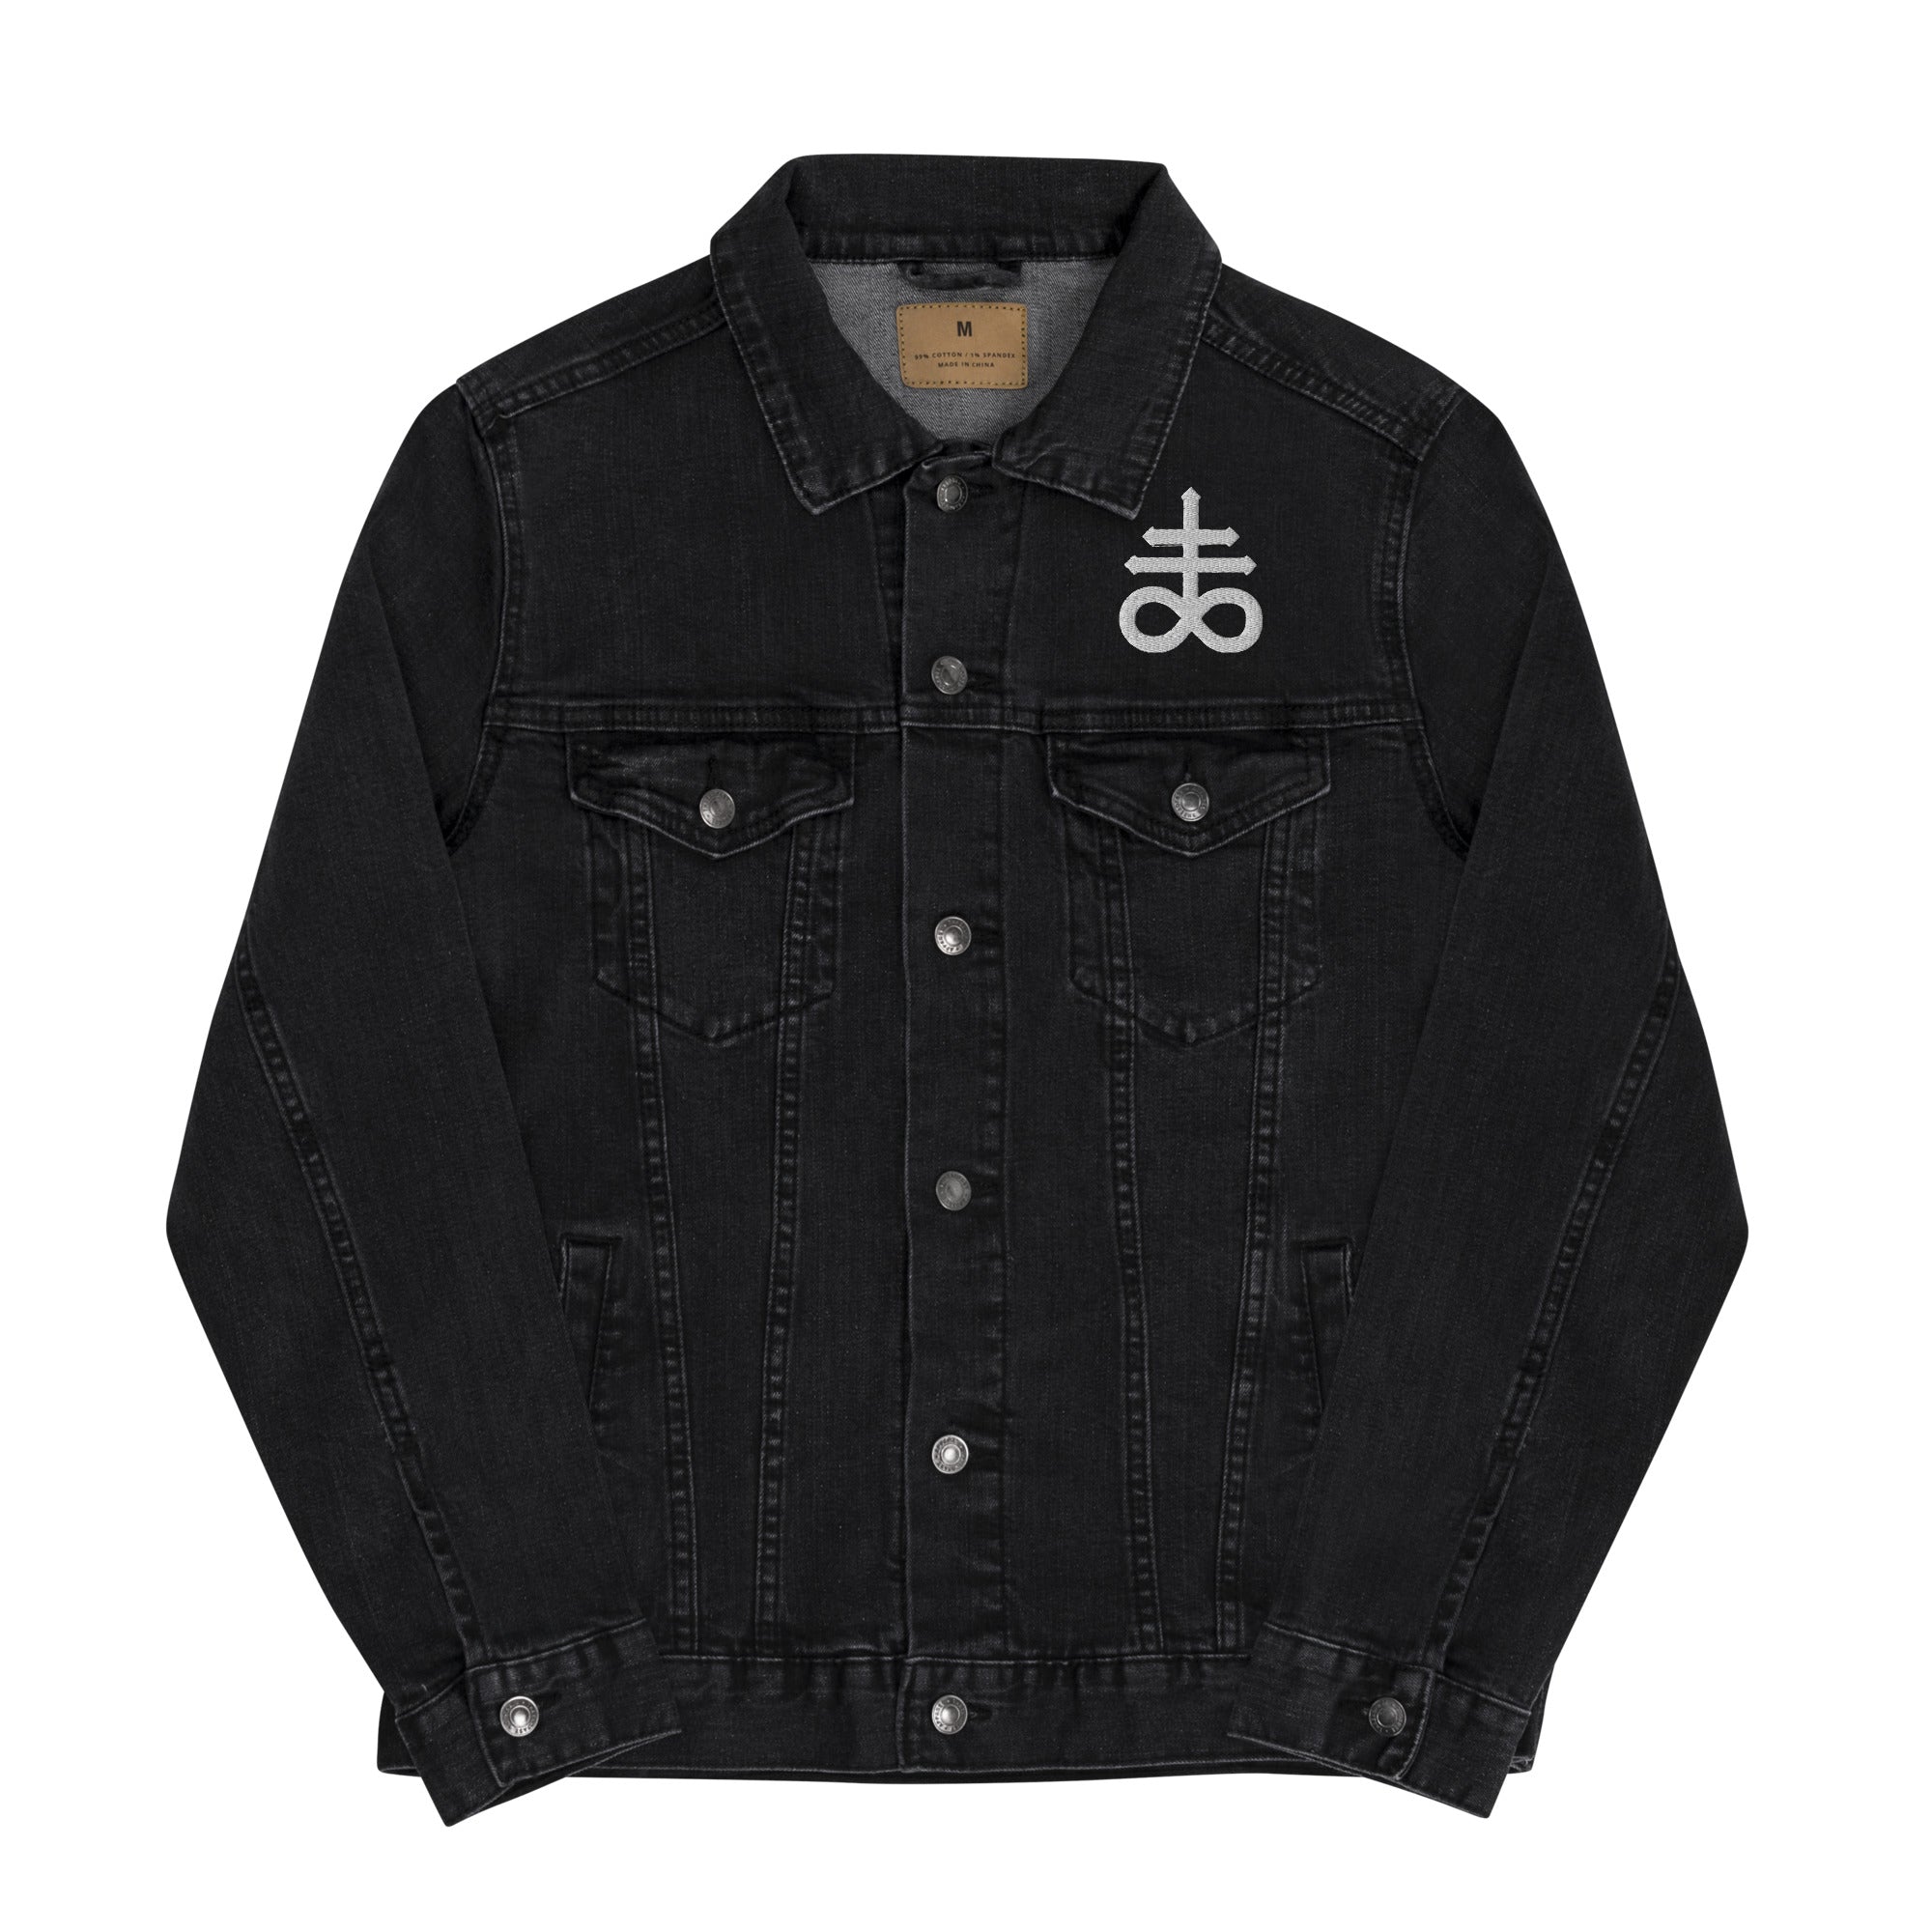 The Leviathan Cross of Satan Occult Symbol Embroidered Denim Jacket - Front and Back - Edge of Life Designs